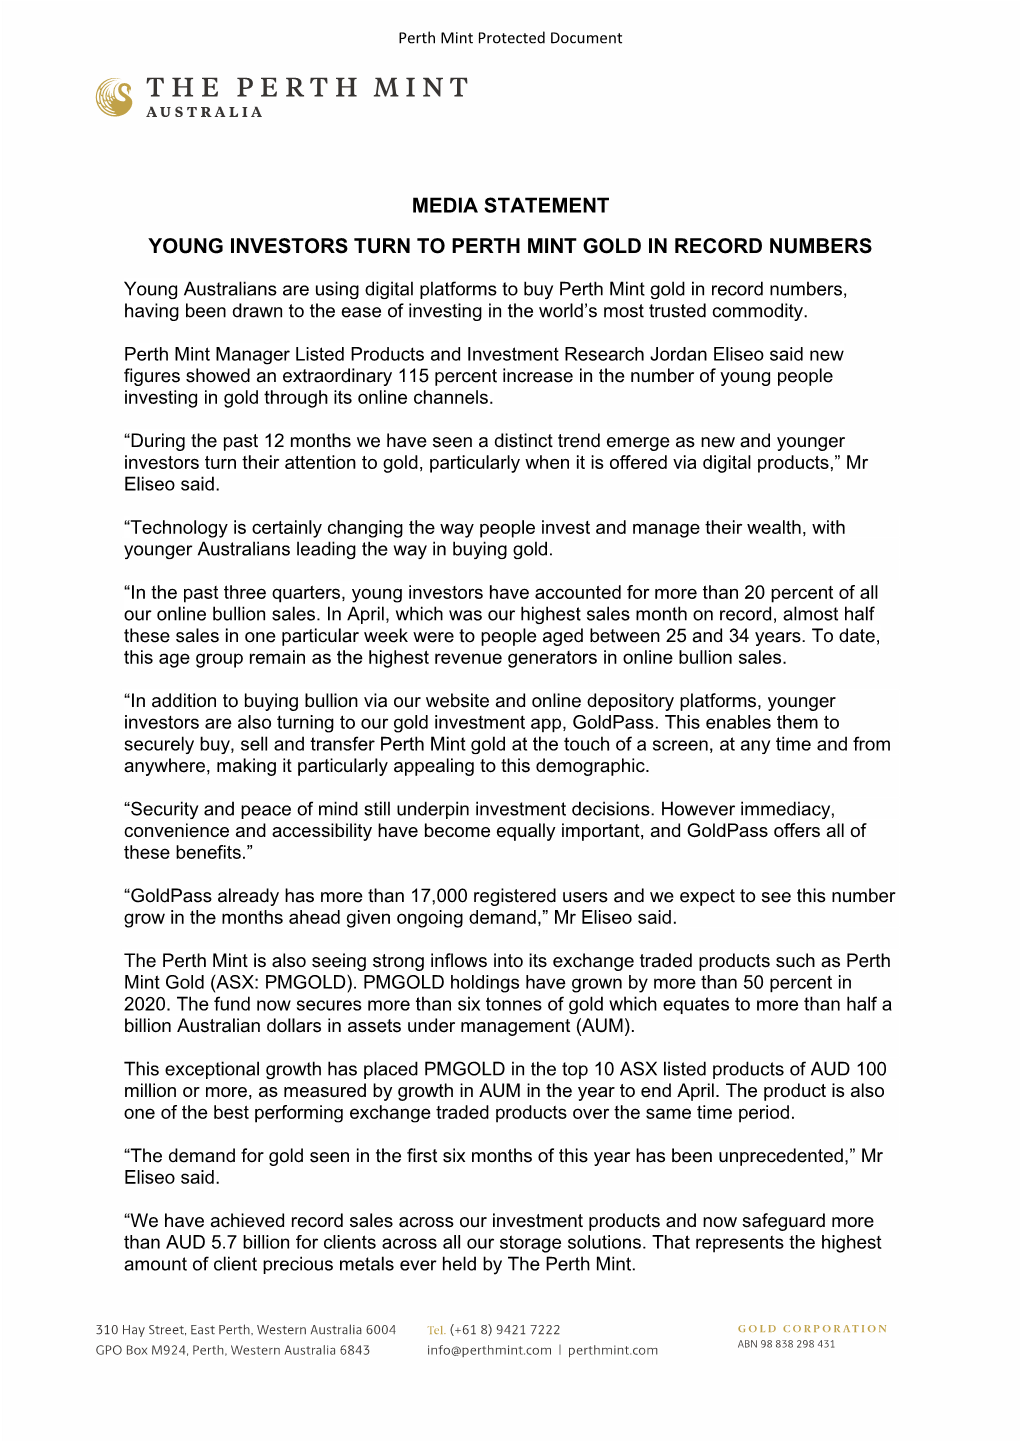 Media Statement Young Investors Turn to Perth Mint Gold in Record Numbers